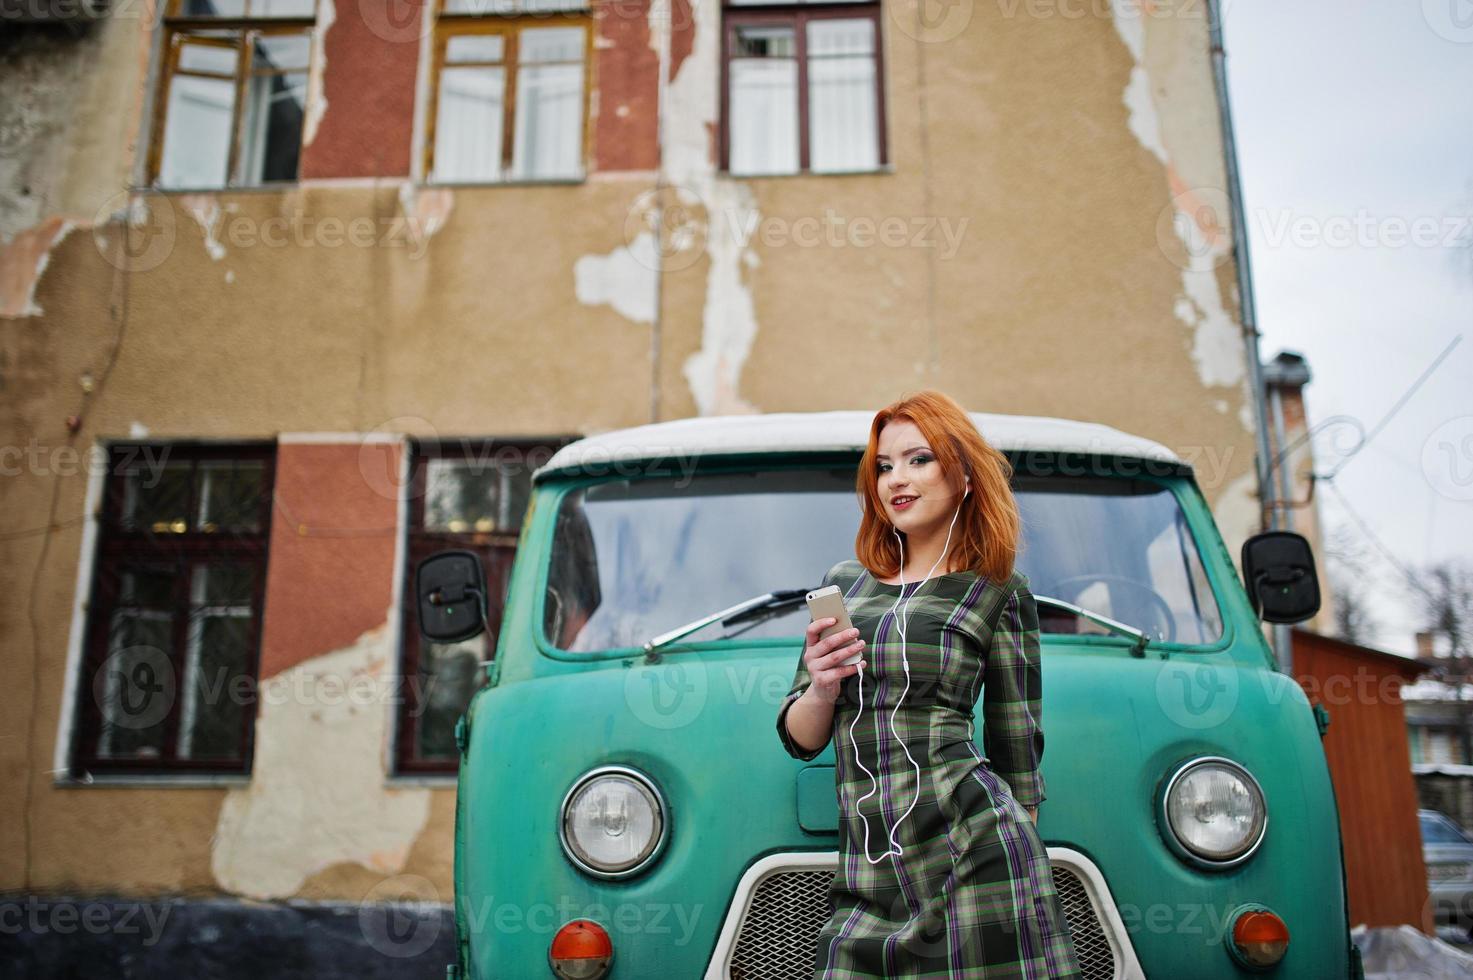 Young red haired girl lady with mobile cell phone and headphones, wearing on checked dress background old vintage turqoise minivan bus. photo